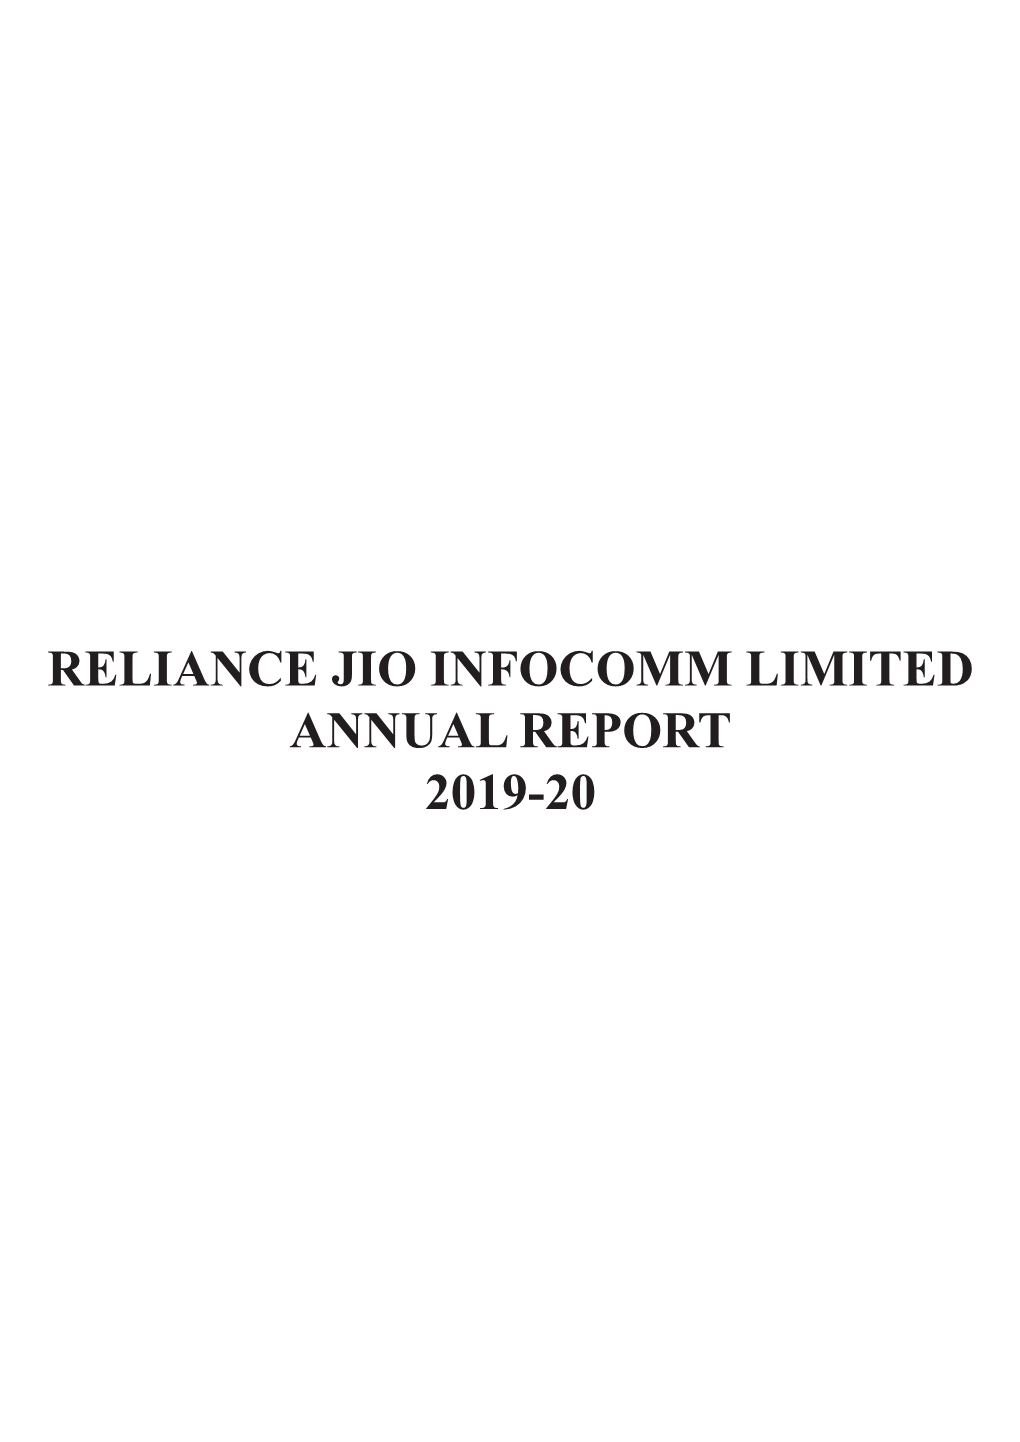 RELIANCE JIO INFOCOMM LIMITED ANNUAL REPORT 2019-20 Index